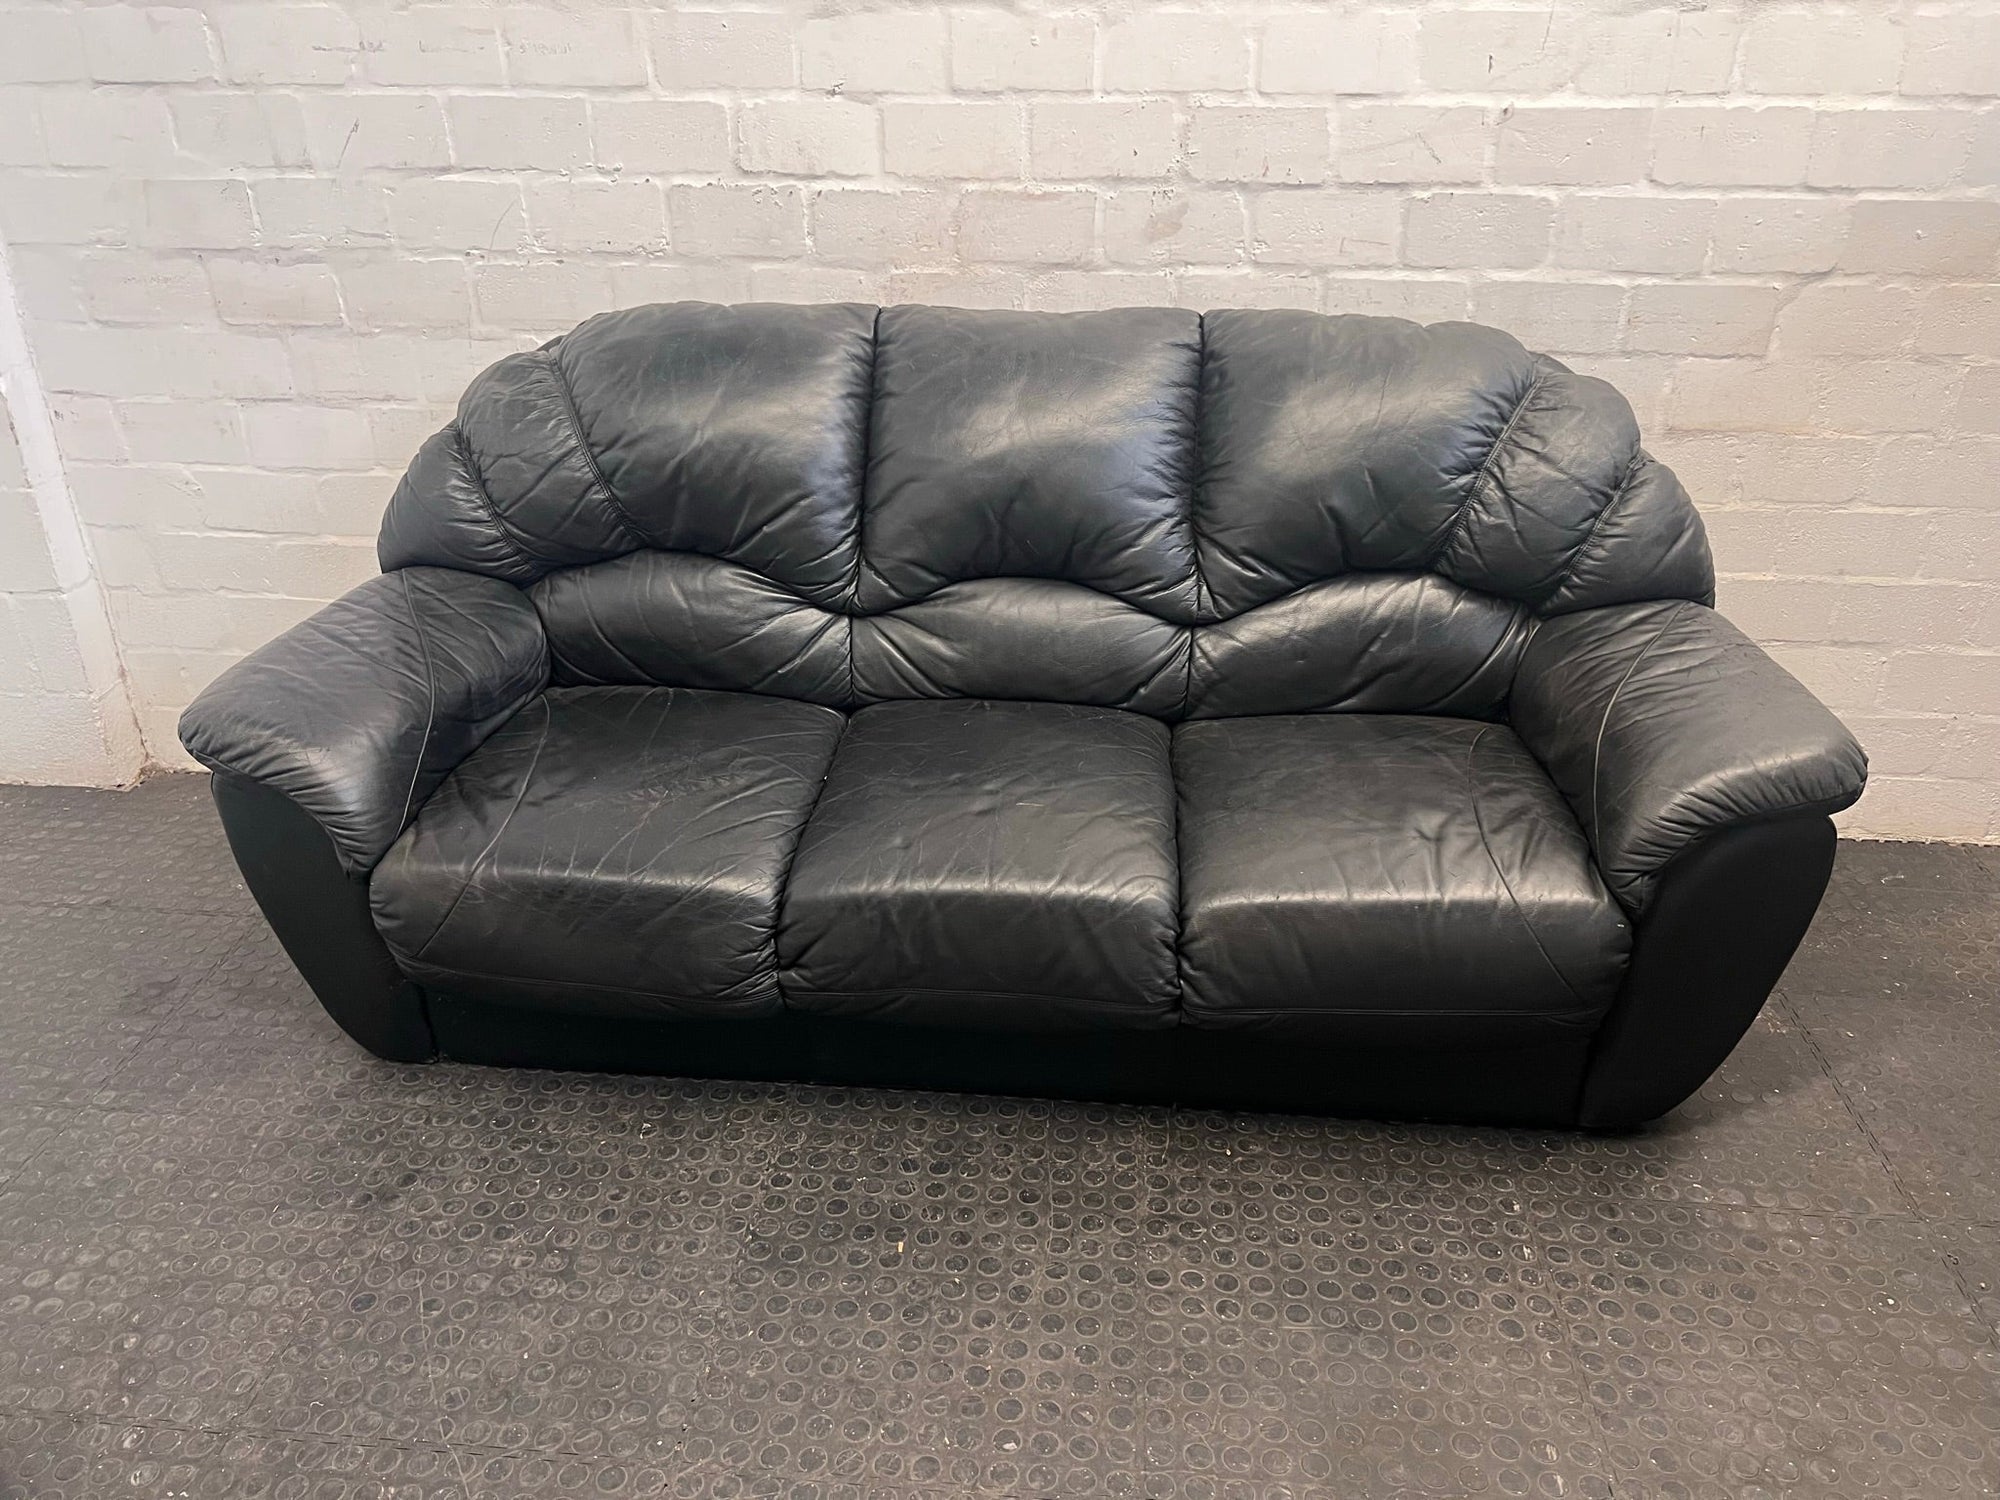 Black Three Seater Leather Couch (Slight Peeling of Leather)